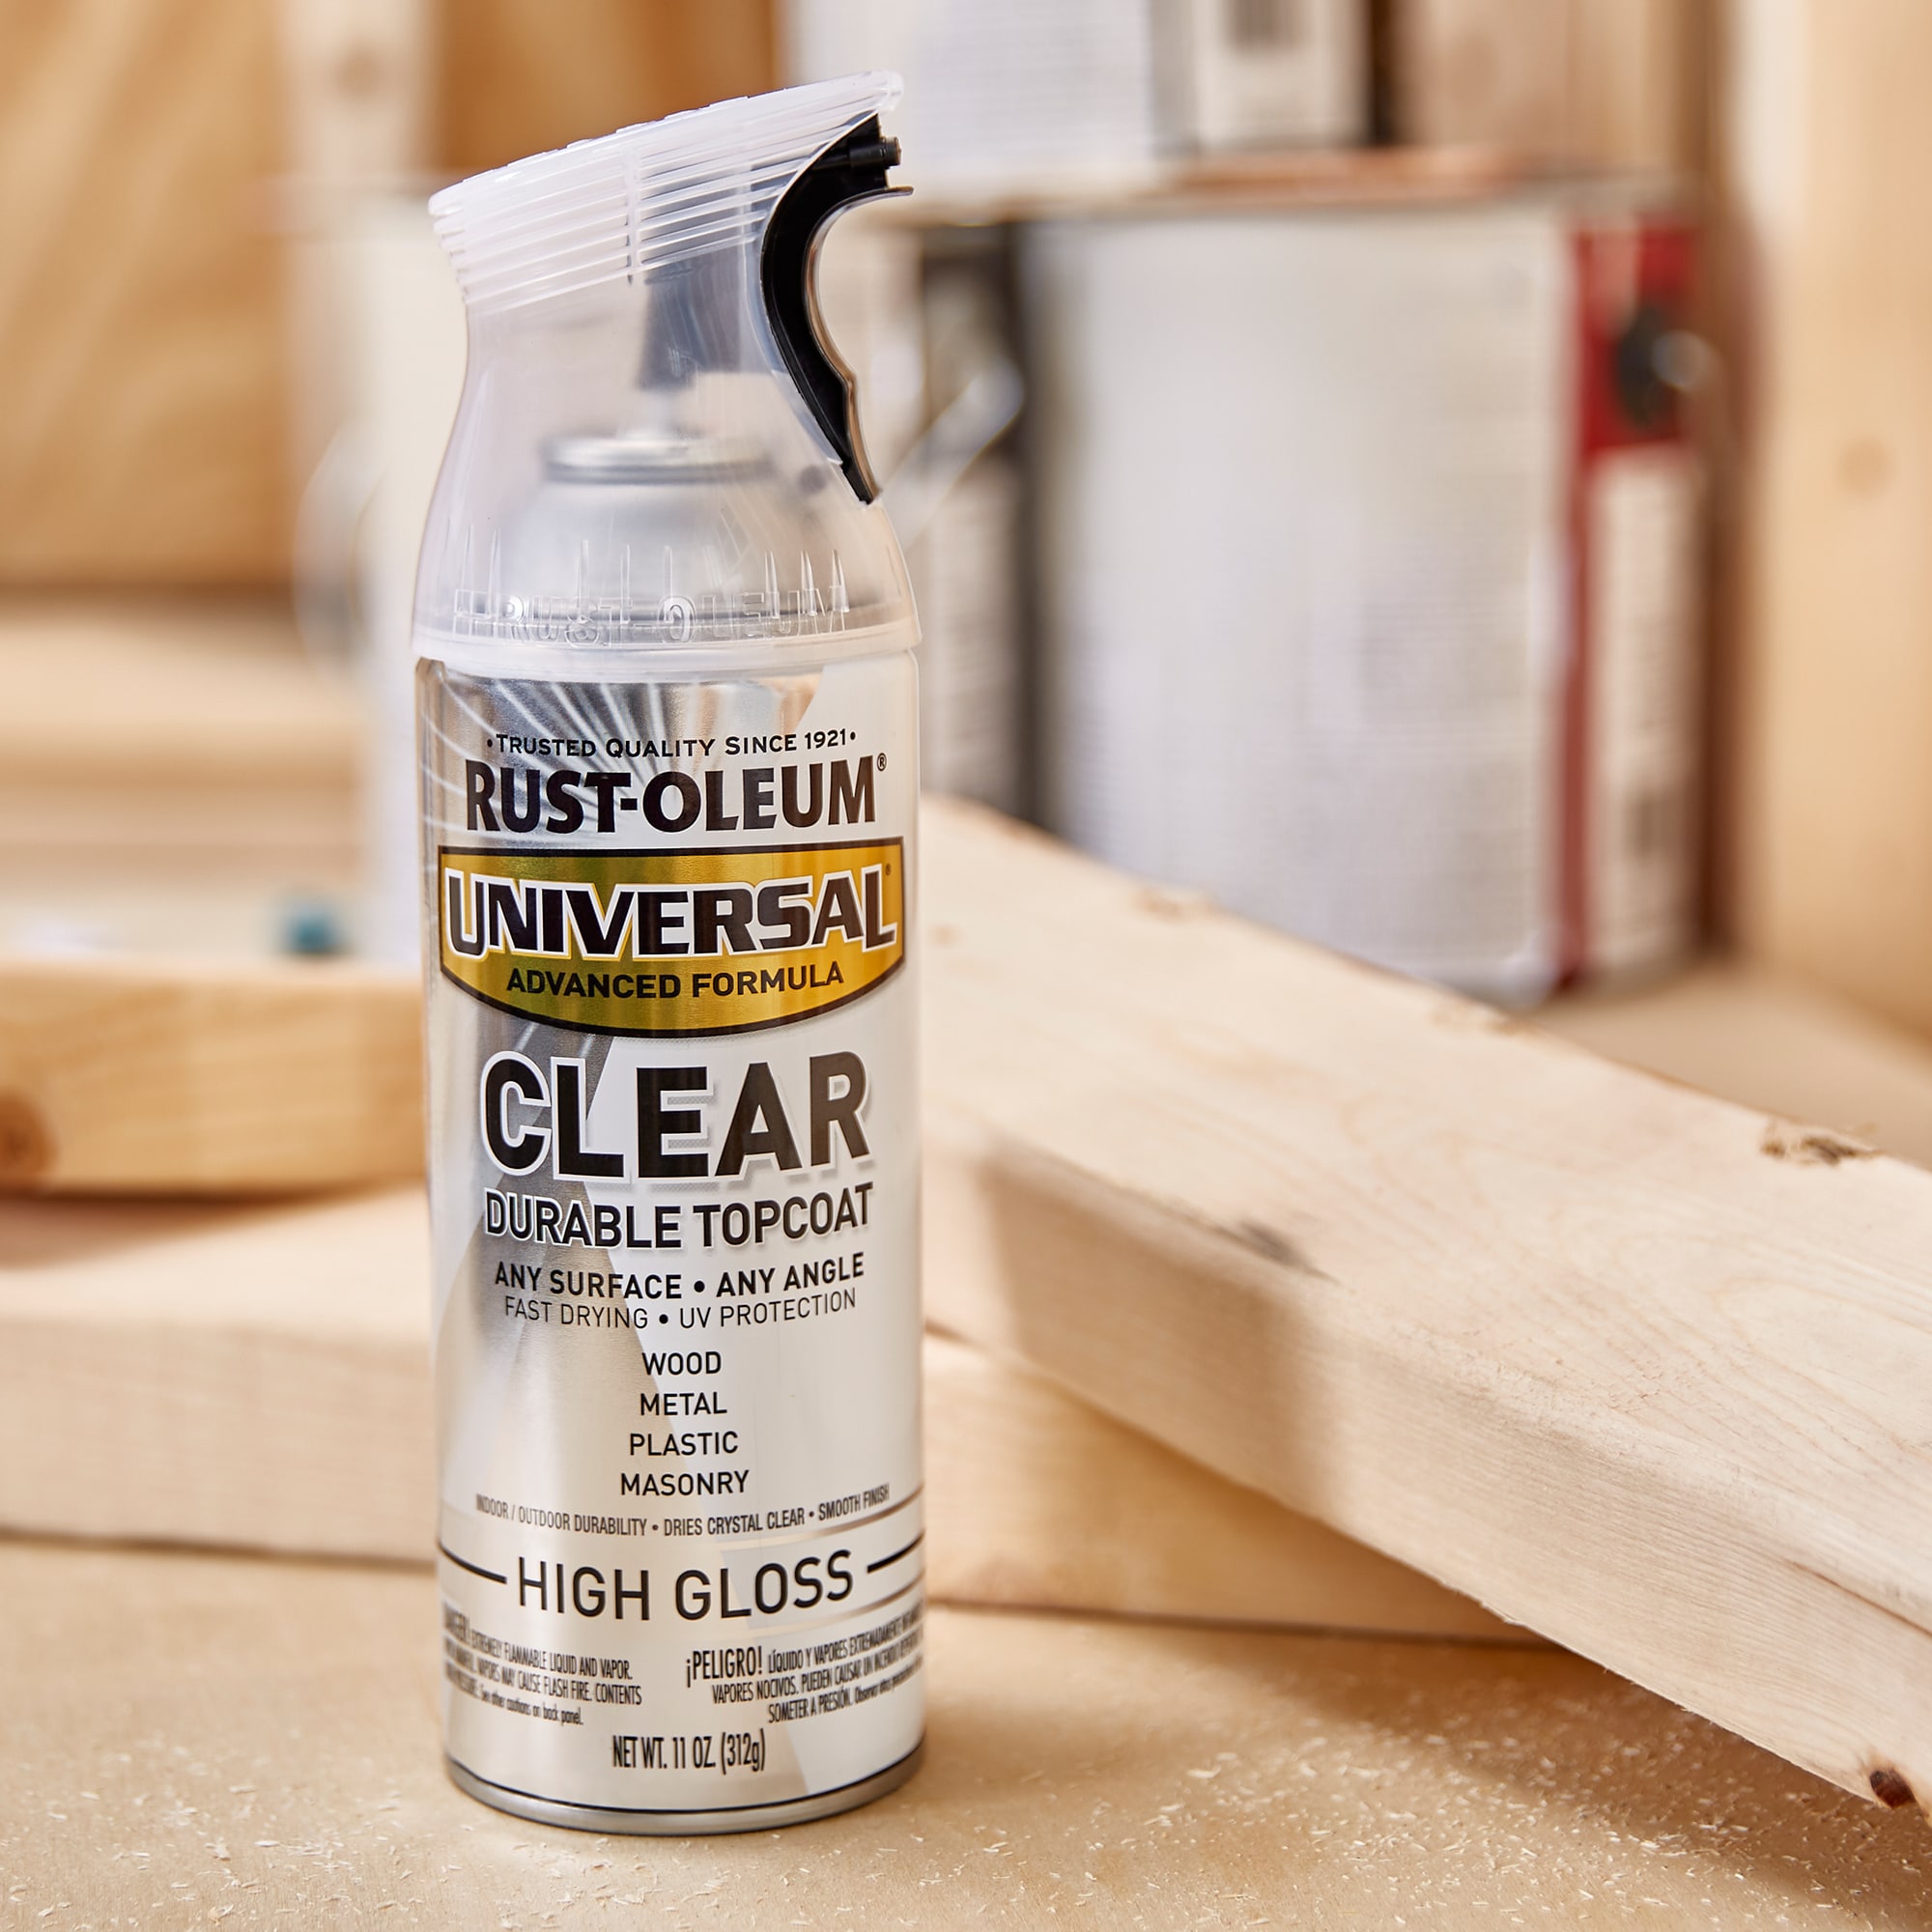 How to make clear varnish at home, diy clear coat